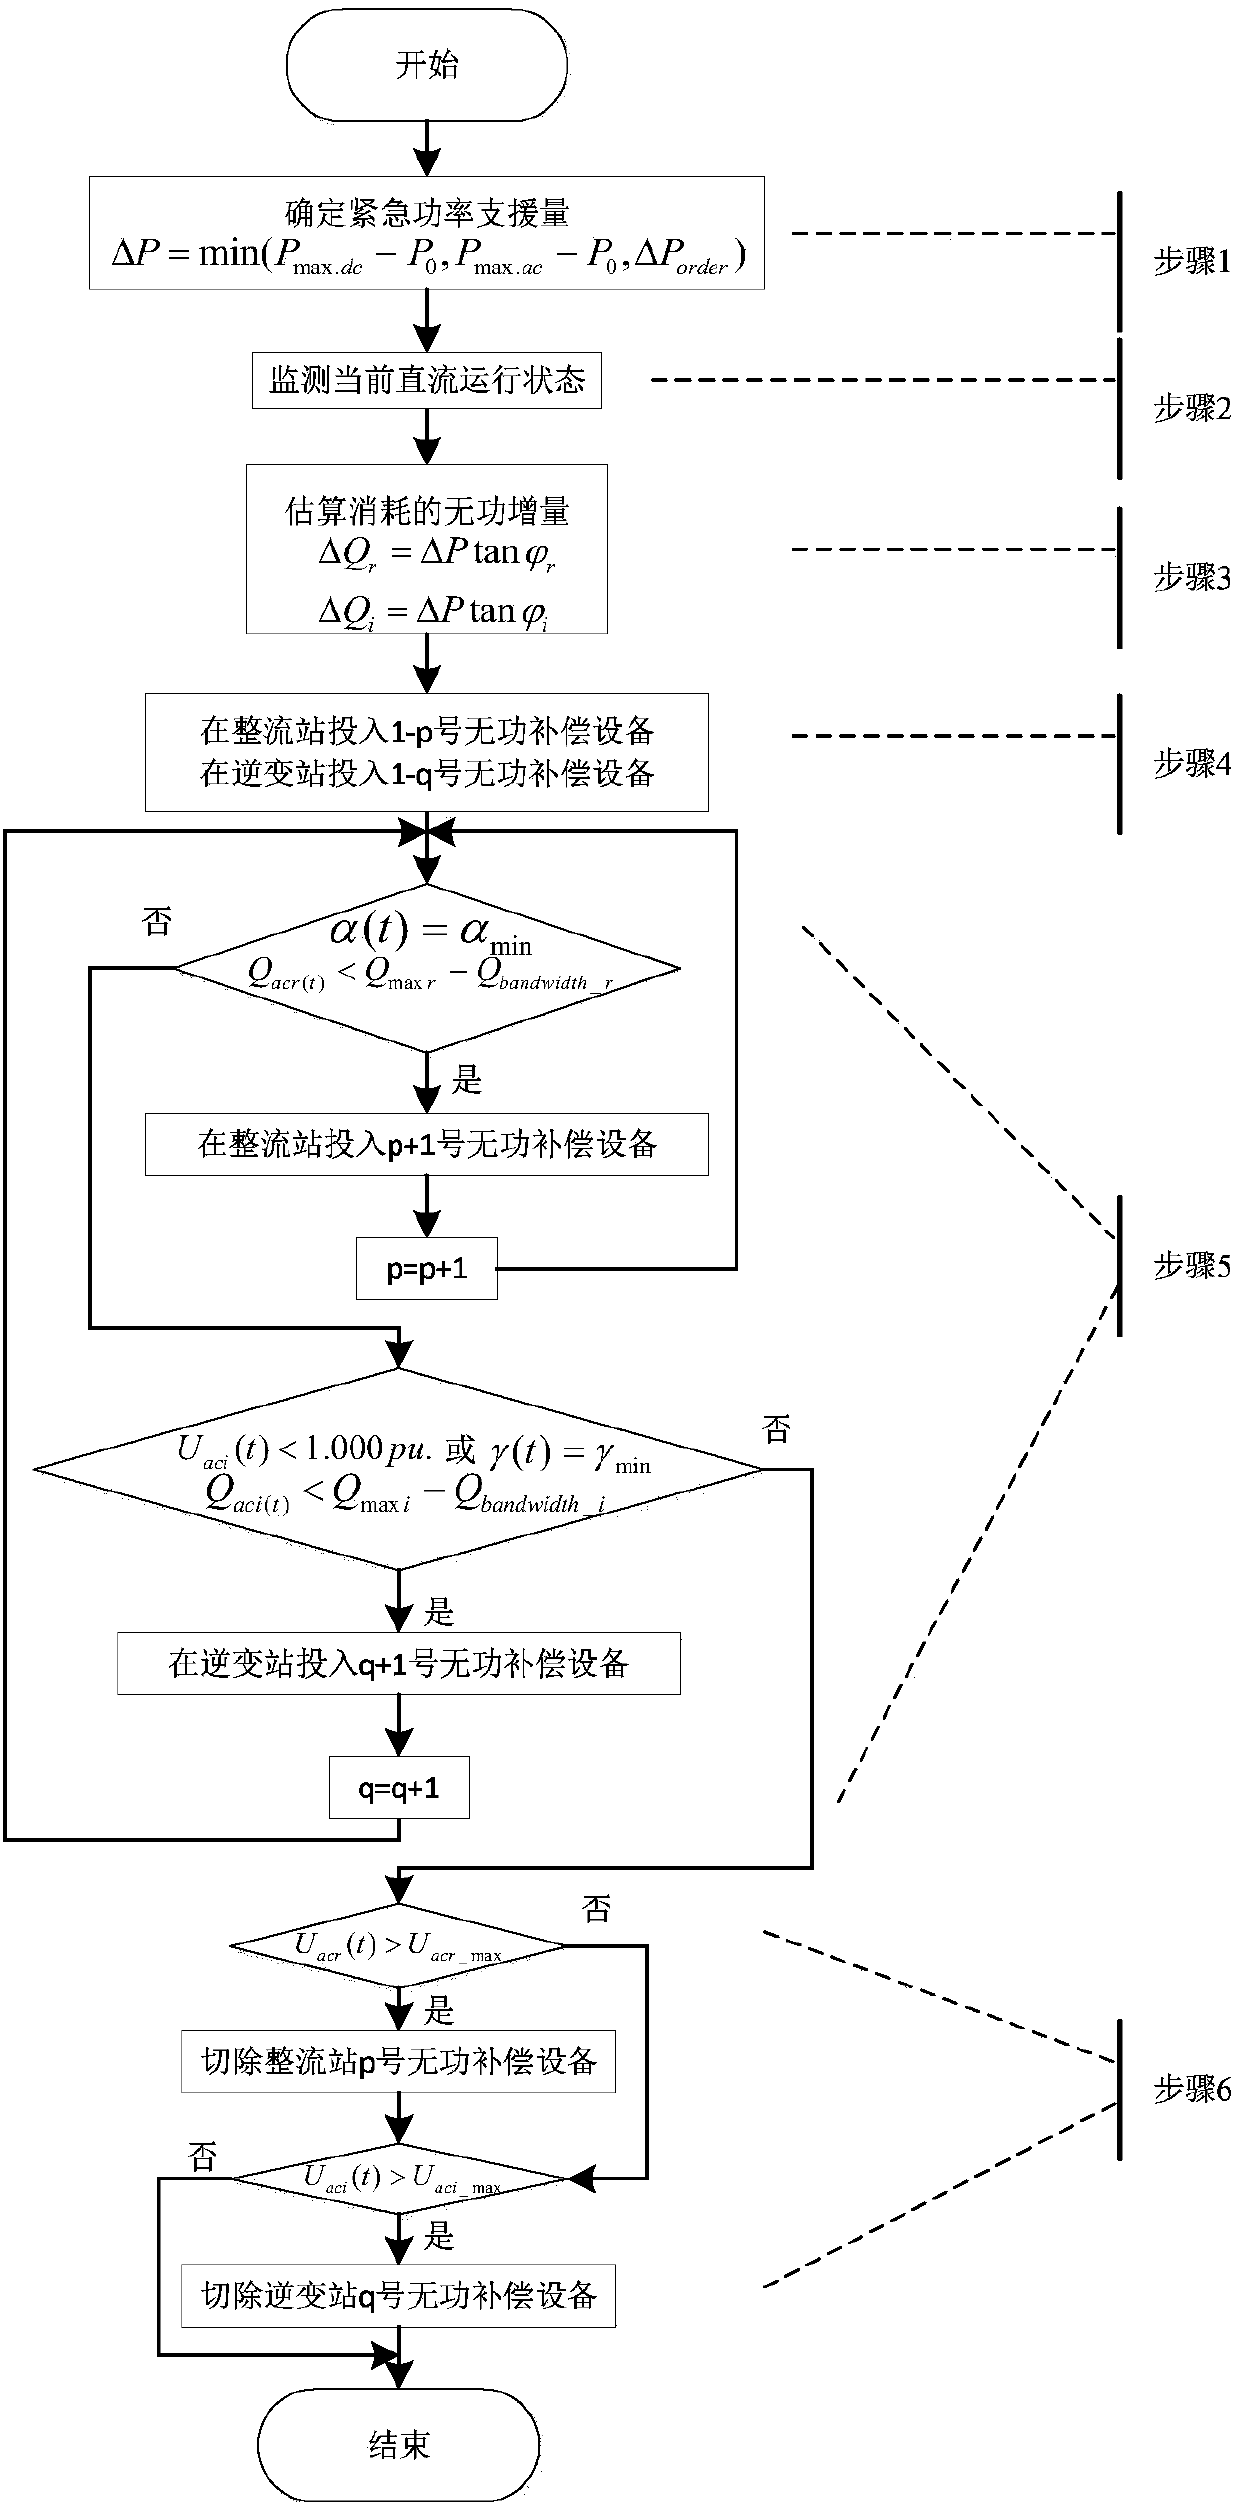 Reactive compensation coordination control method during DC emergency power support process